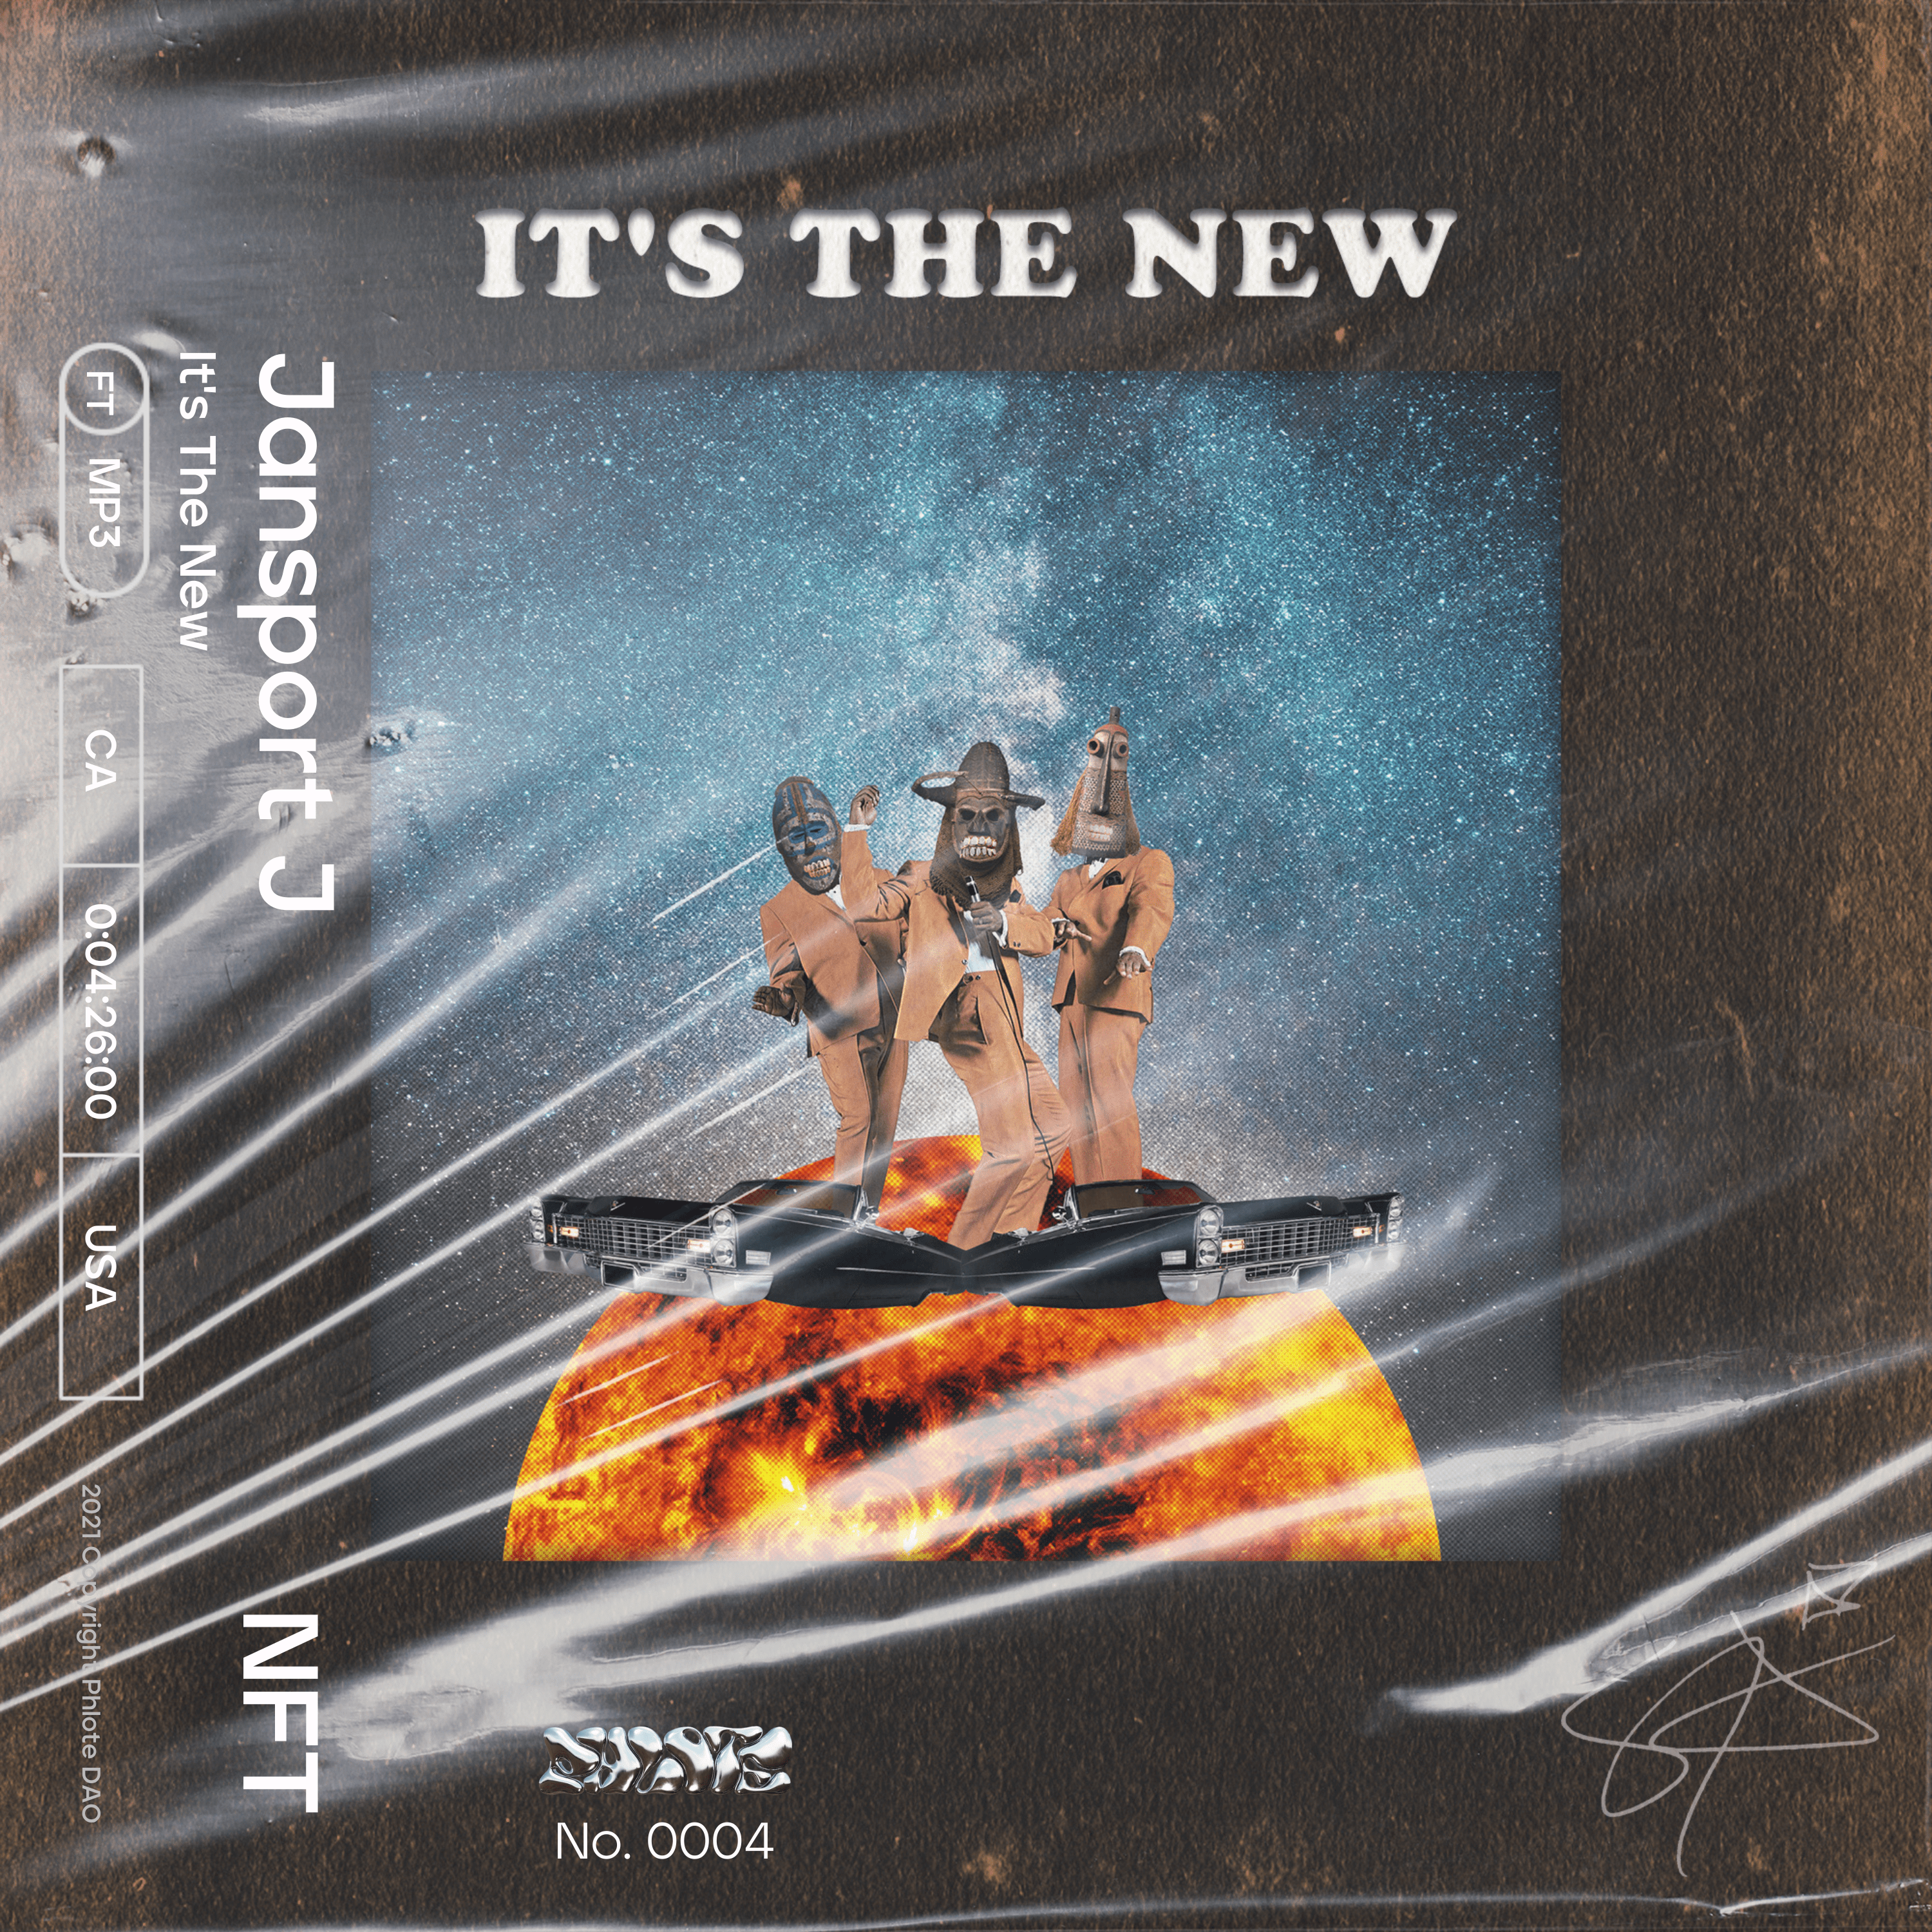 Cover art for Jansport J's song: It's The New